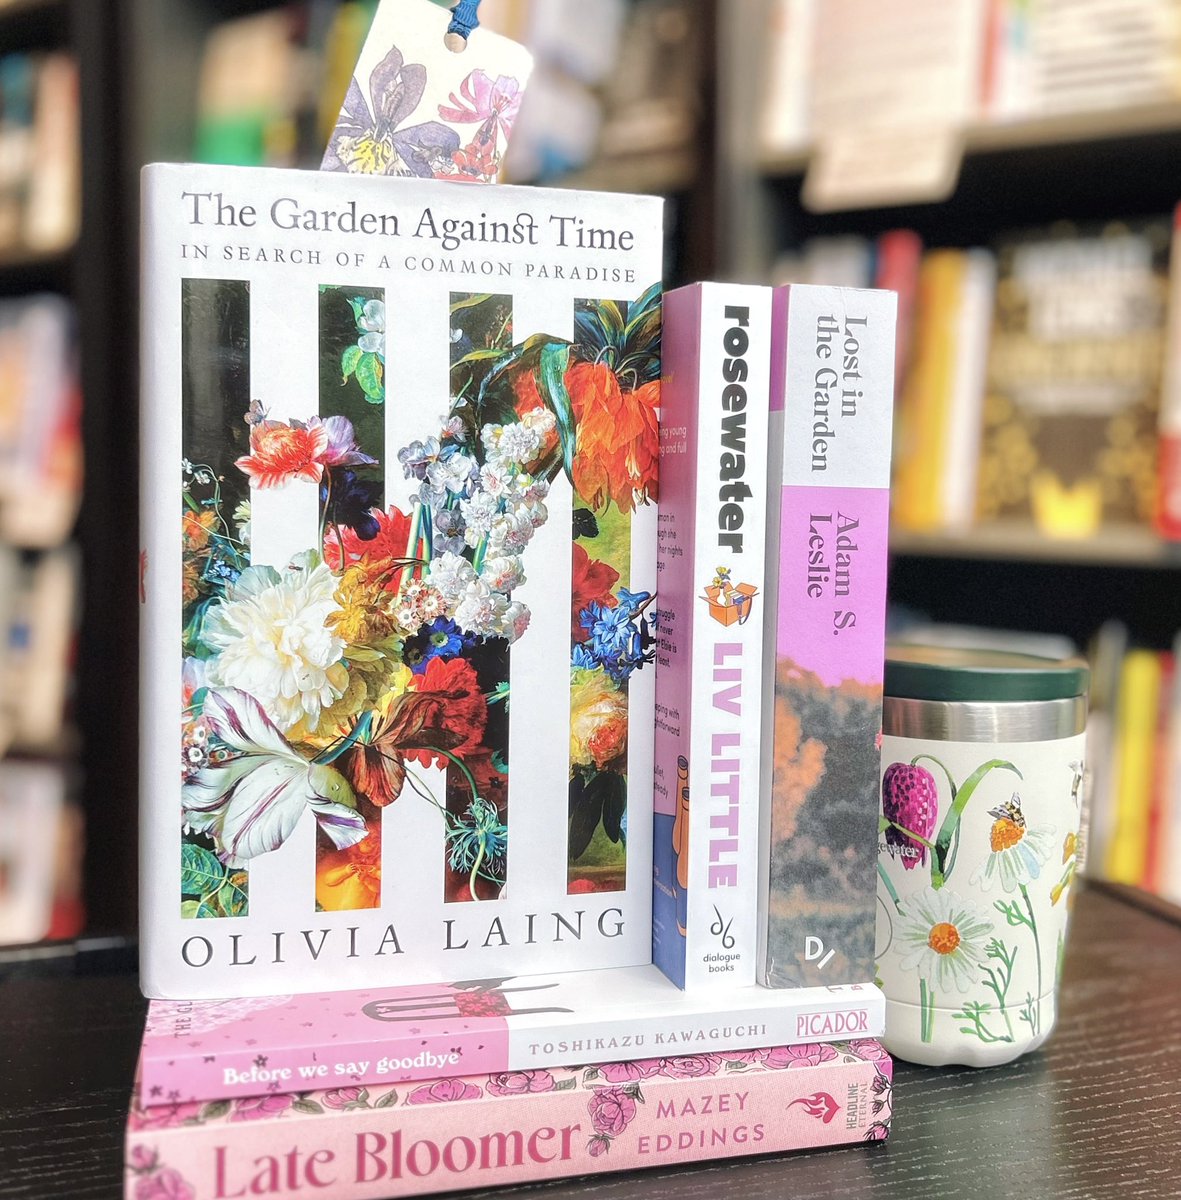 Florals for spring? Groundbreaking 🌸 Journey through legendary gardens from culture & history with Olivia Laing, or fall into dreamy folk horror in the English countryside with Adam Leslie 🌻